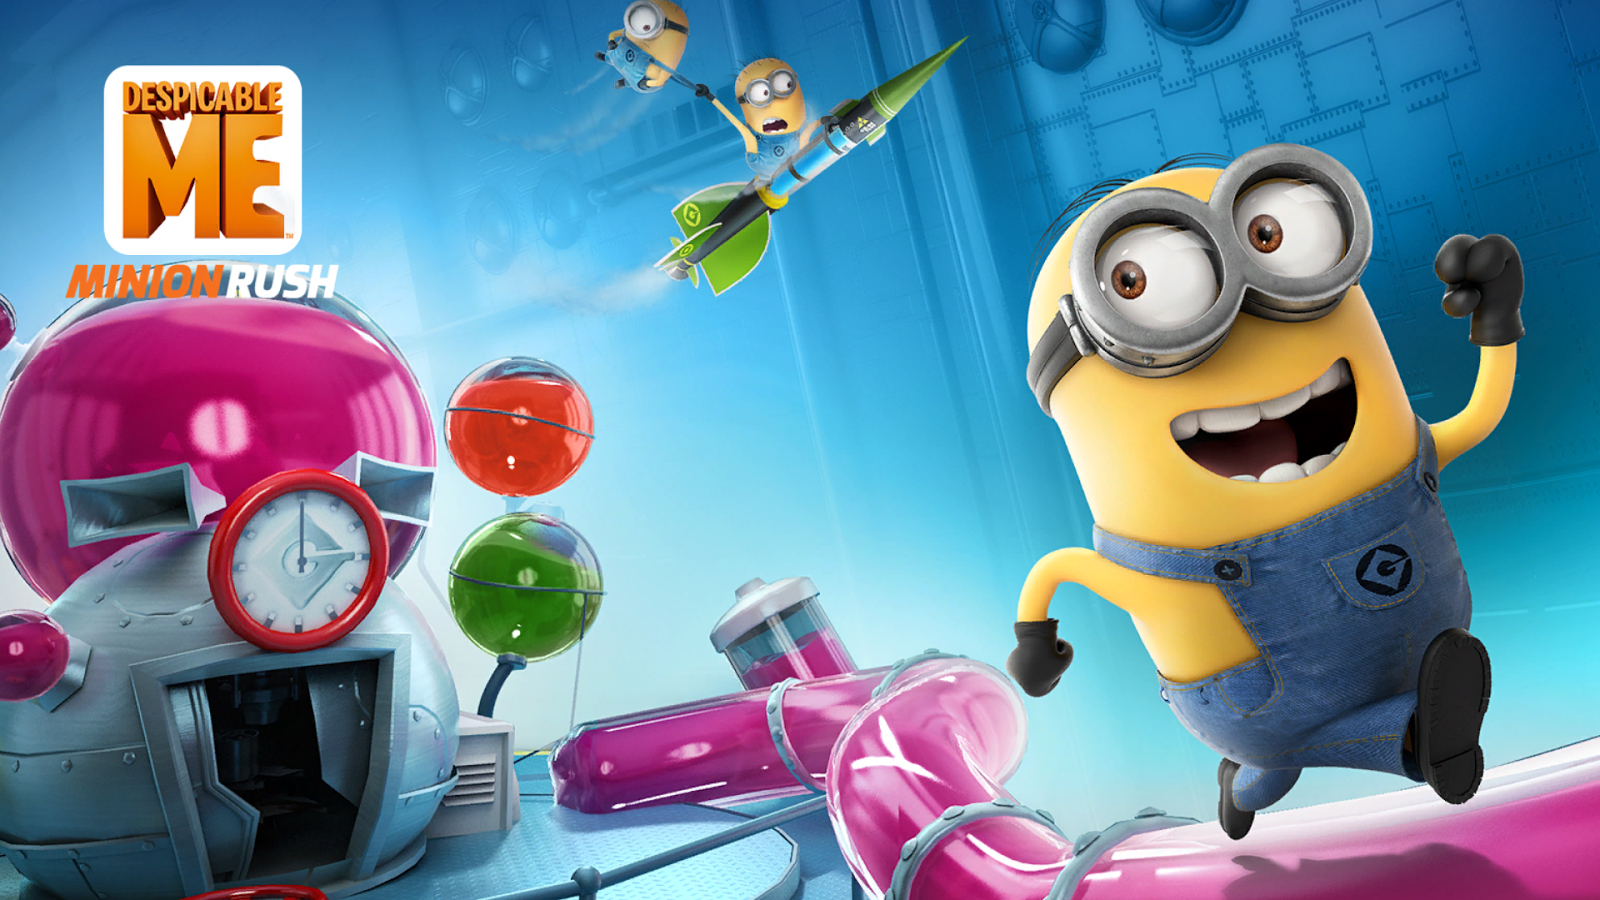 Download Minion Rush APK Mod Hack For Tokens and Coins - Tech Info APK